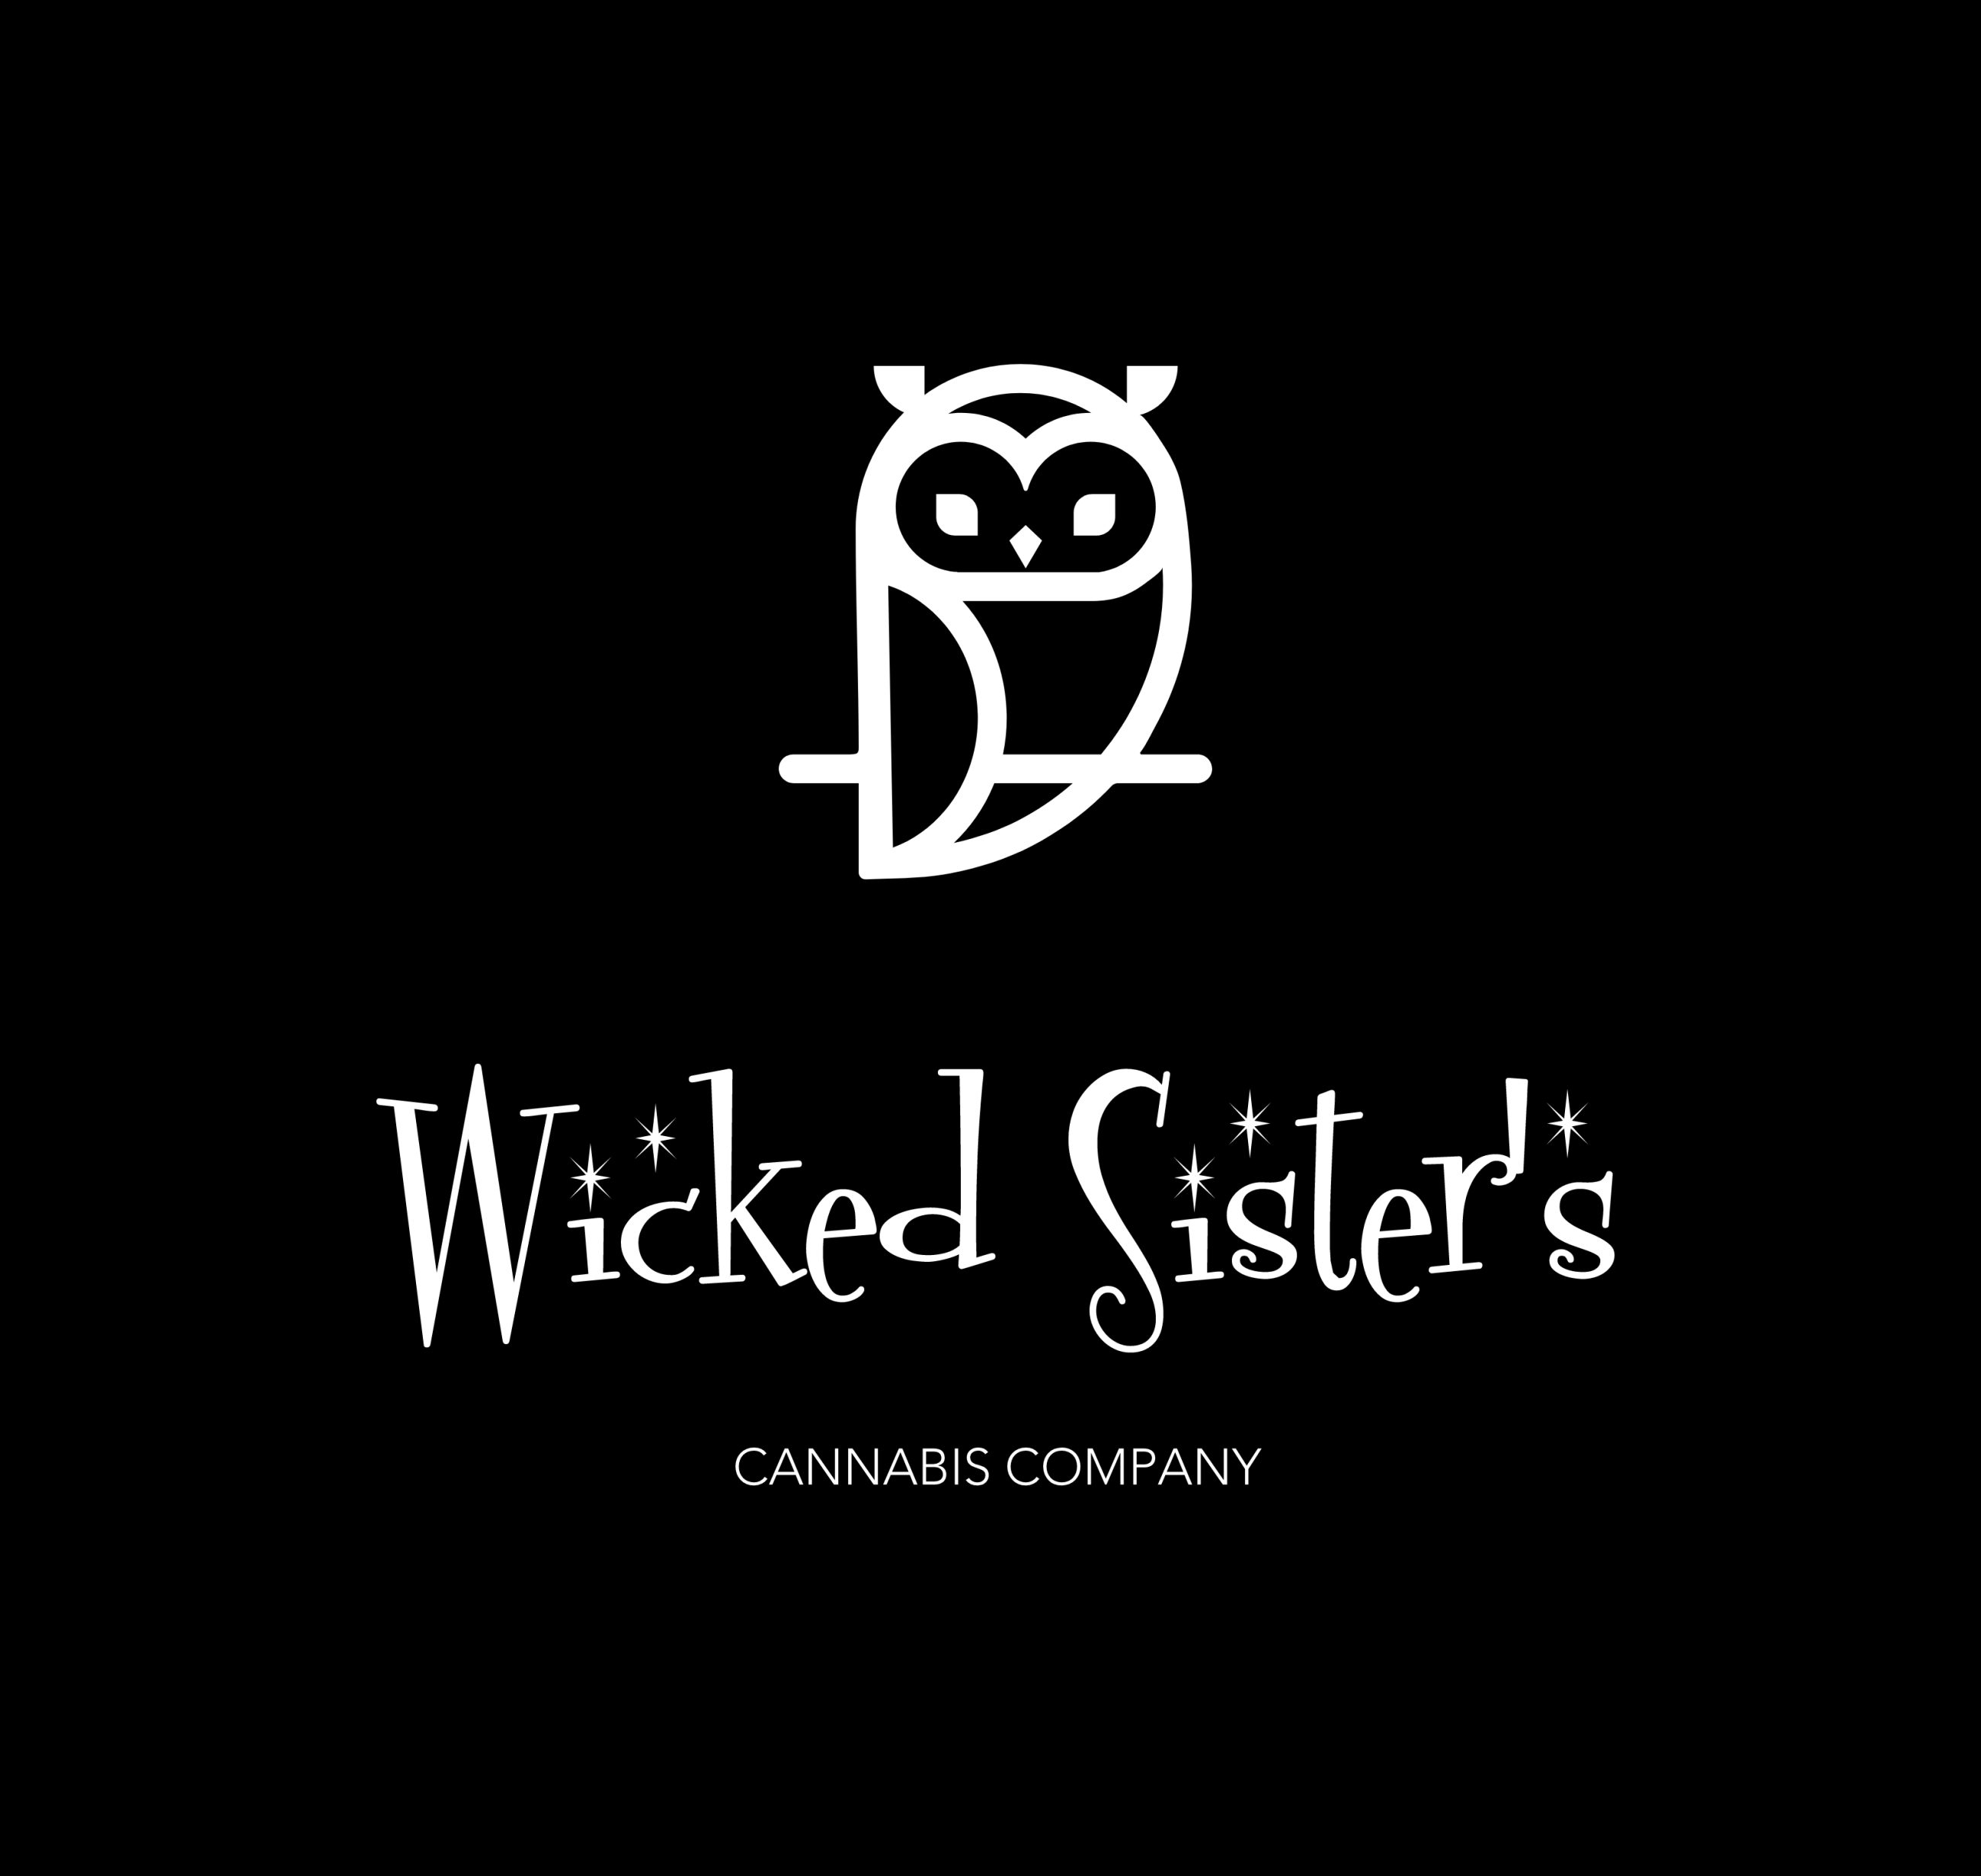 Wicked Sister's